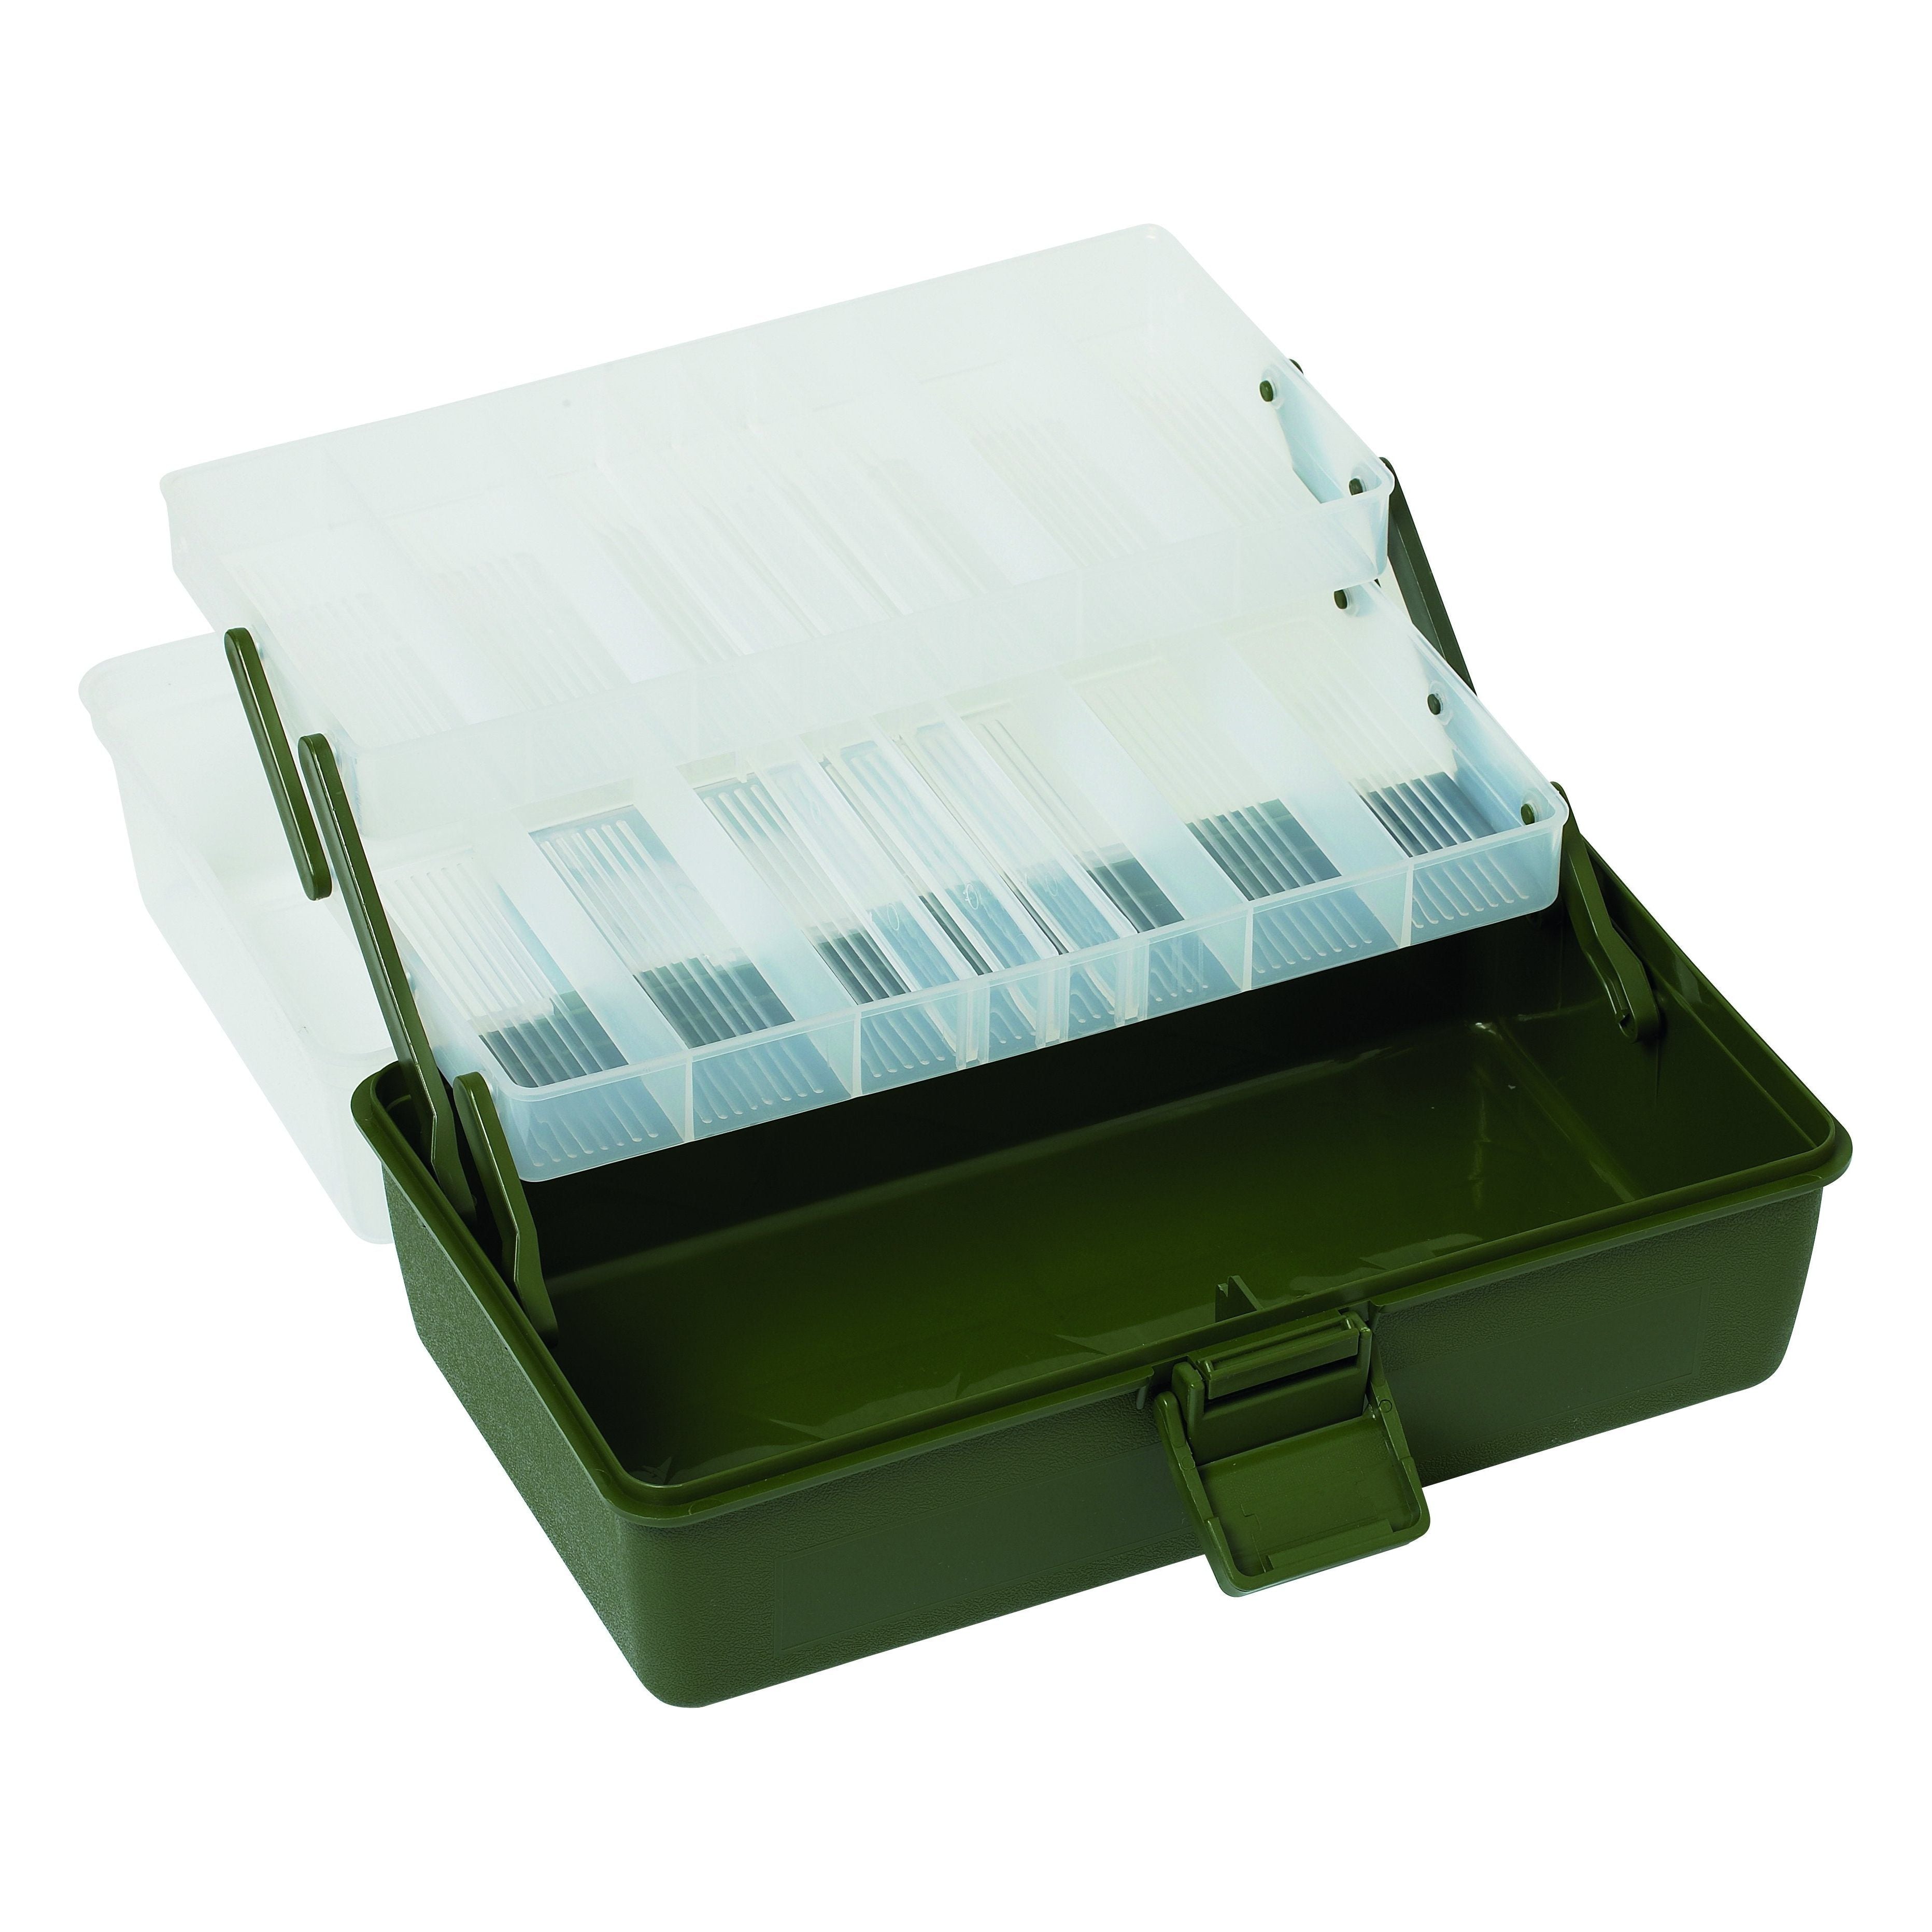 G124-096-S KINETIC TACKLE BOX 2 DRAWERS S CLEAR/GREEN AT TED JOHNSONS PROBLEM SOLVED